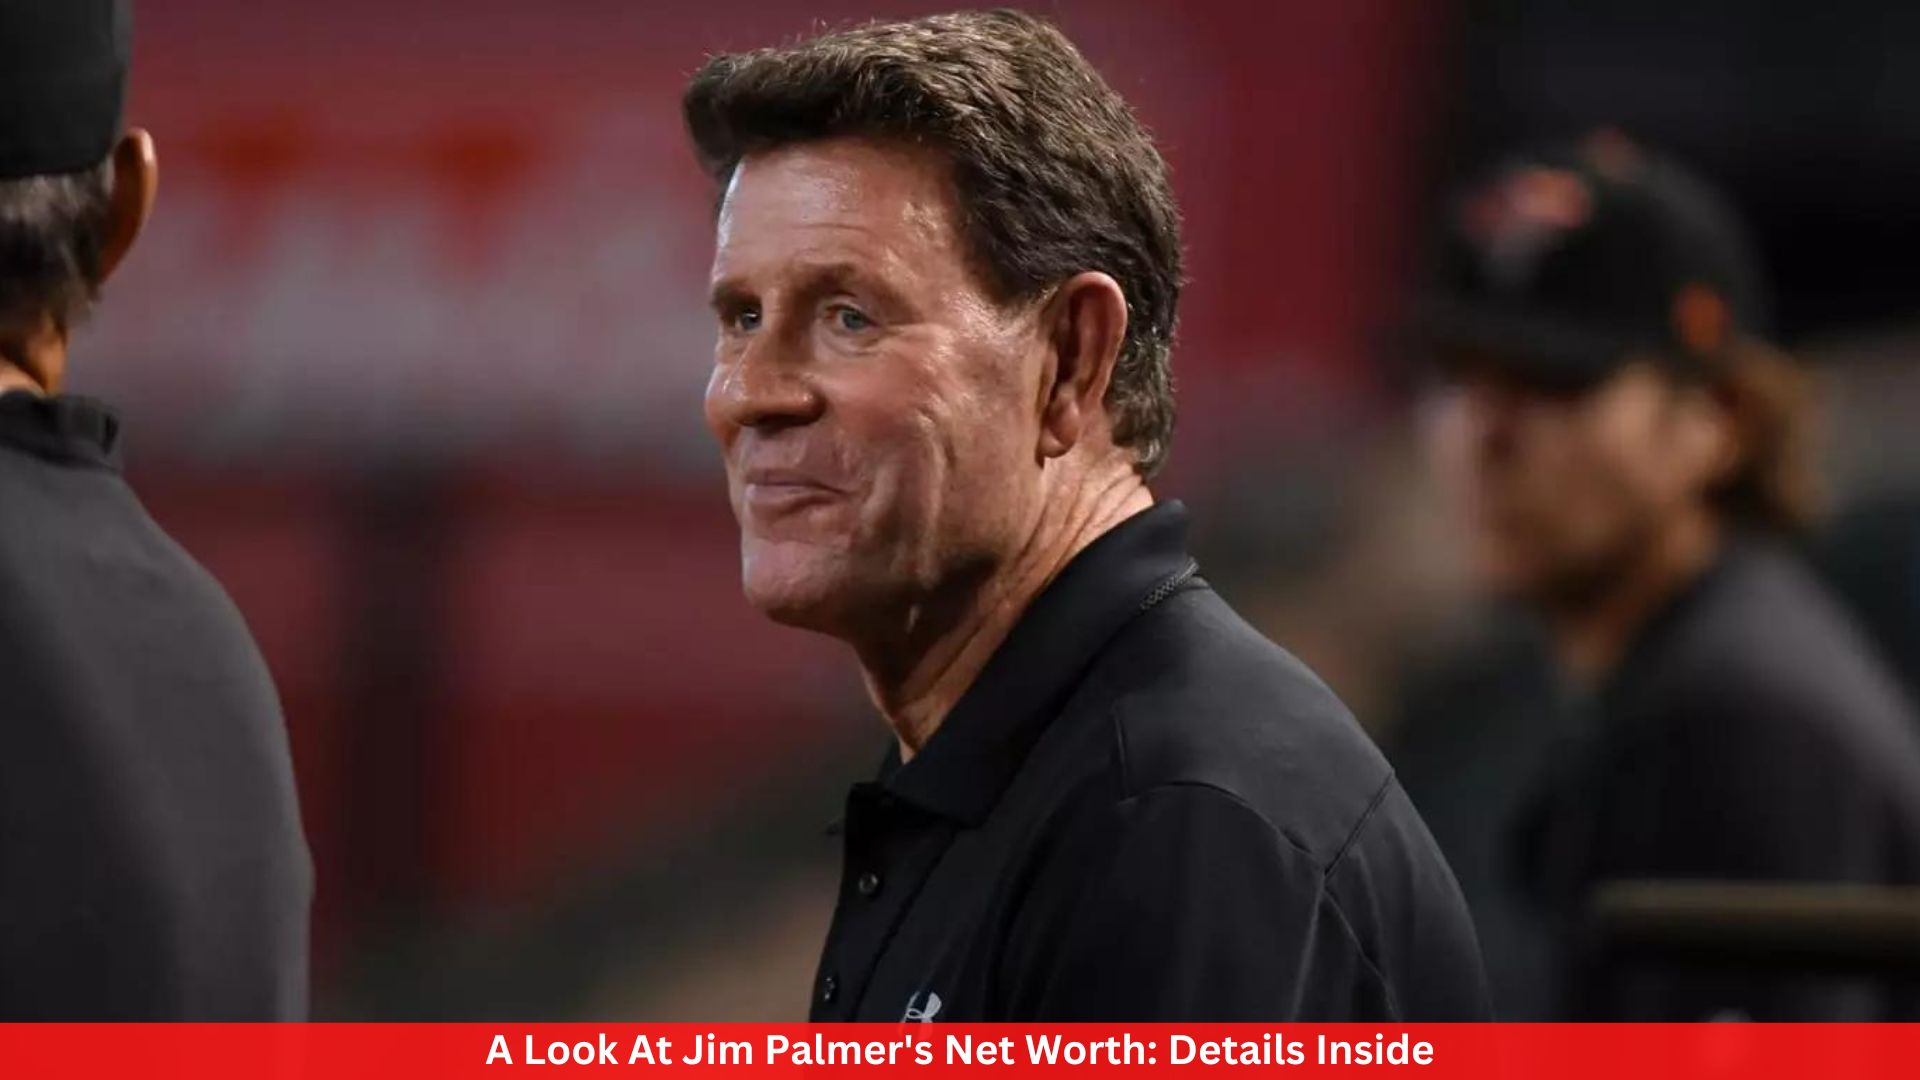 A Look At Jim Palmer's Net Worth: Details Inside